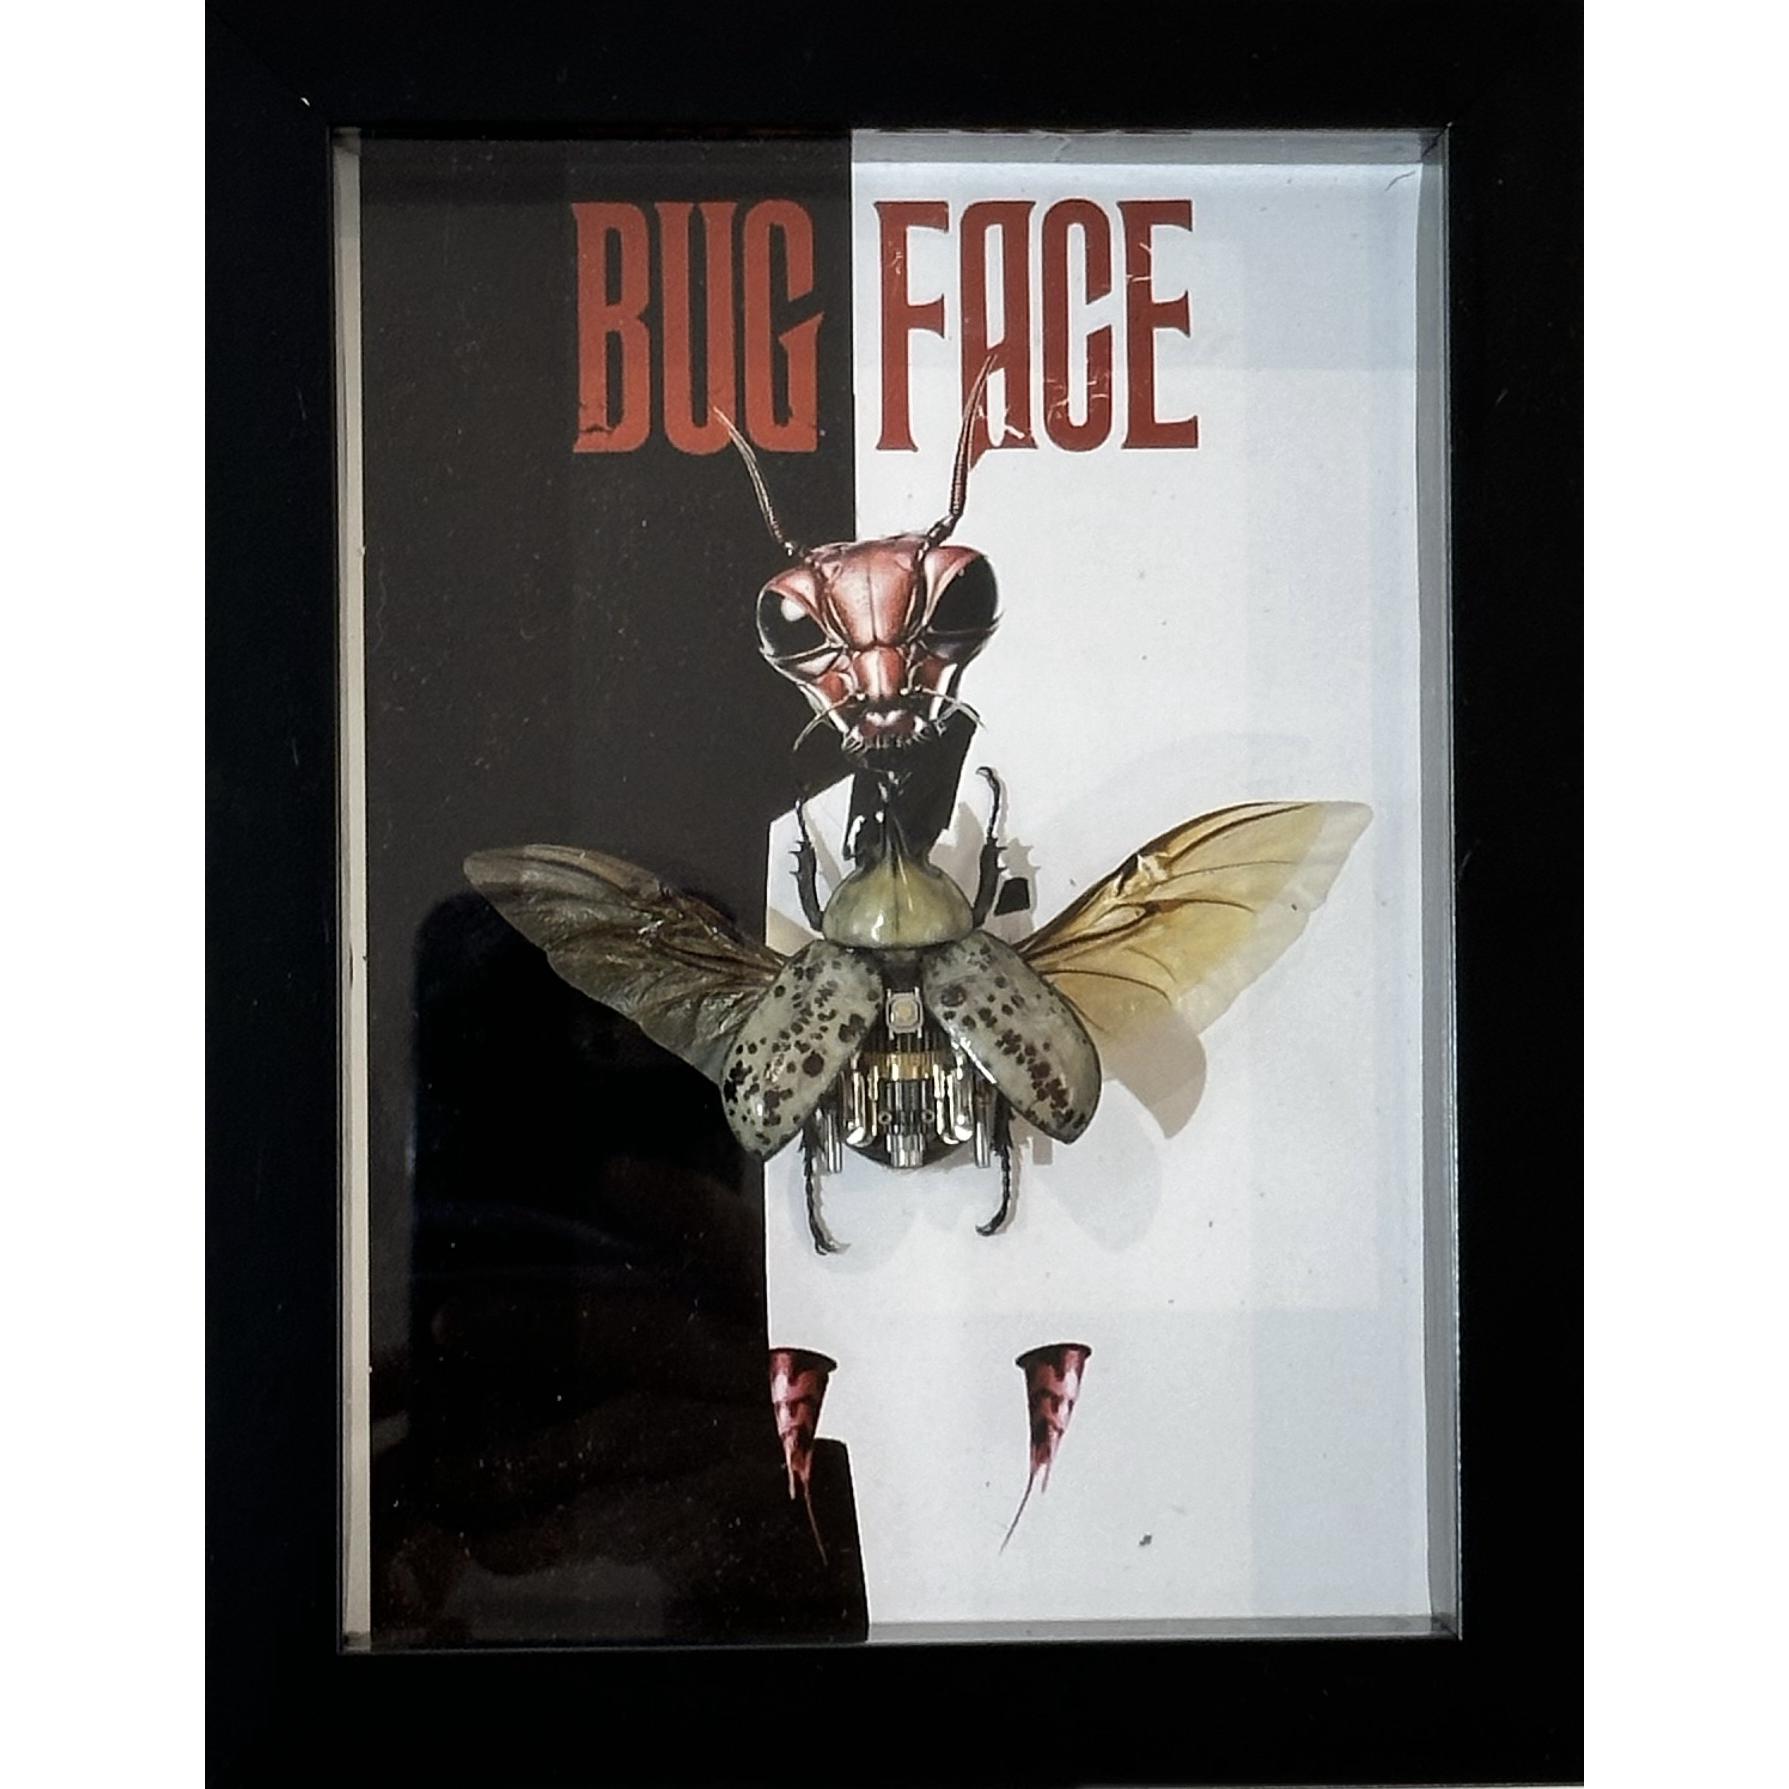 Bugface fun themed steampunk art in frame. the melding of mechanical and natural insect is amazing taxidermy